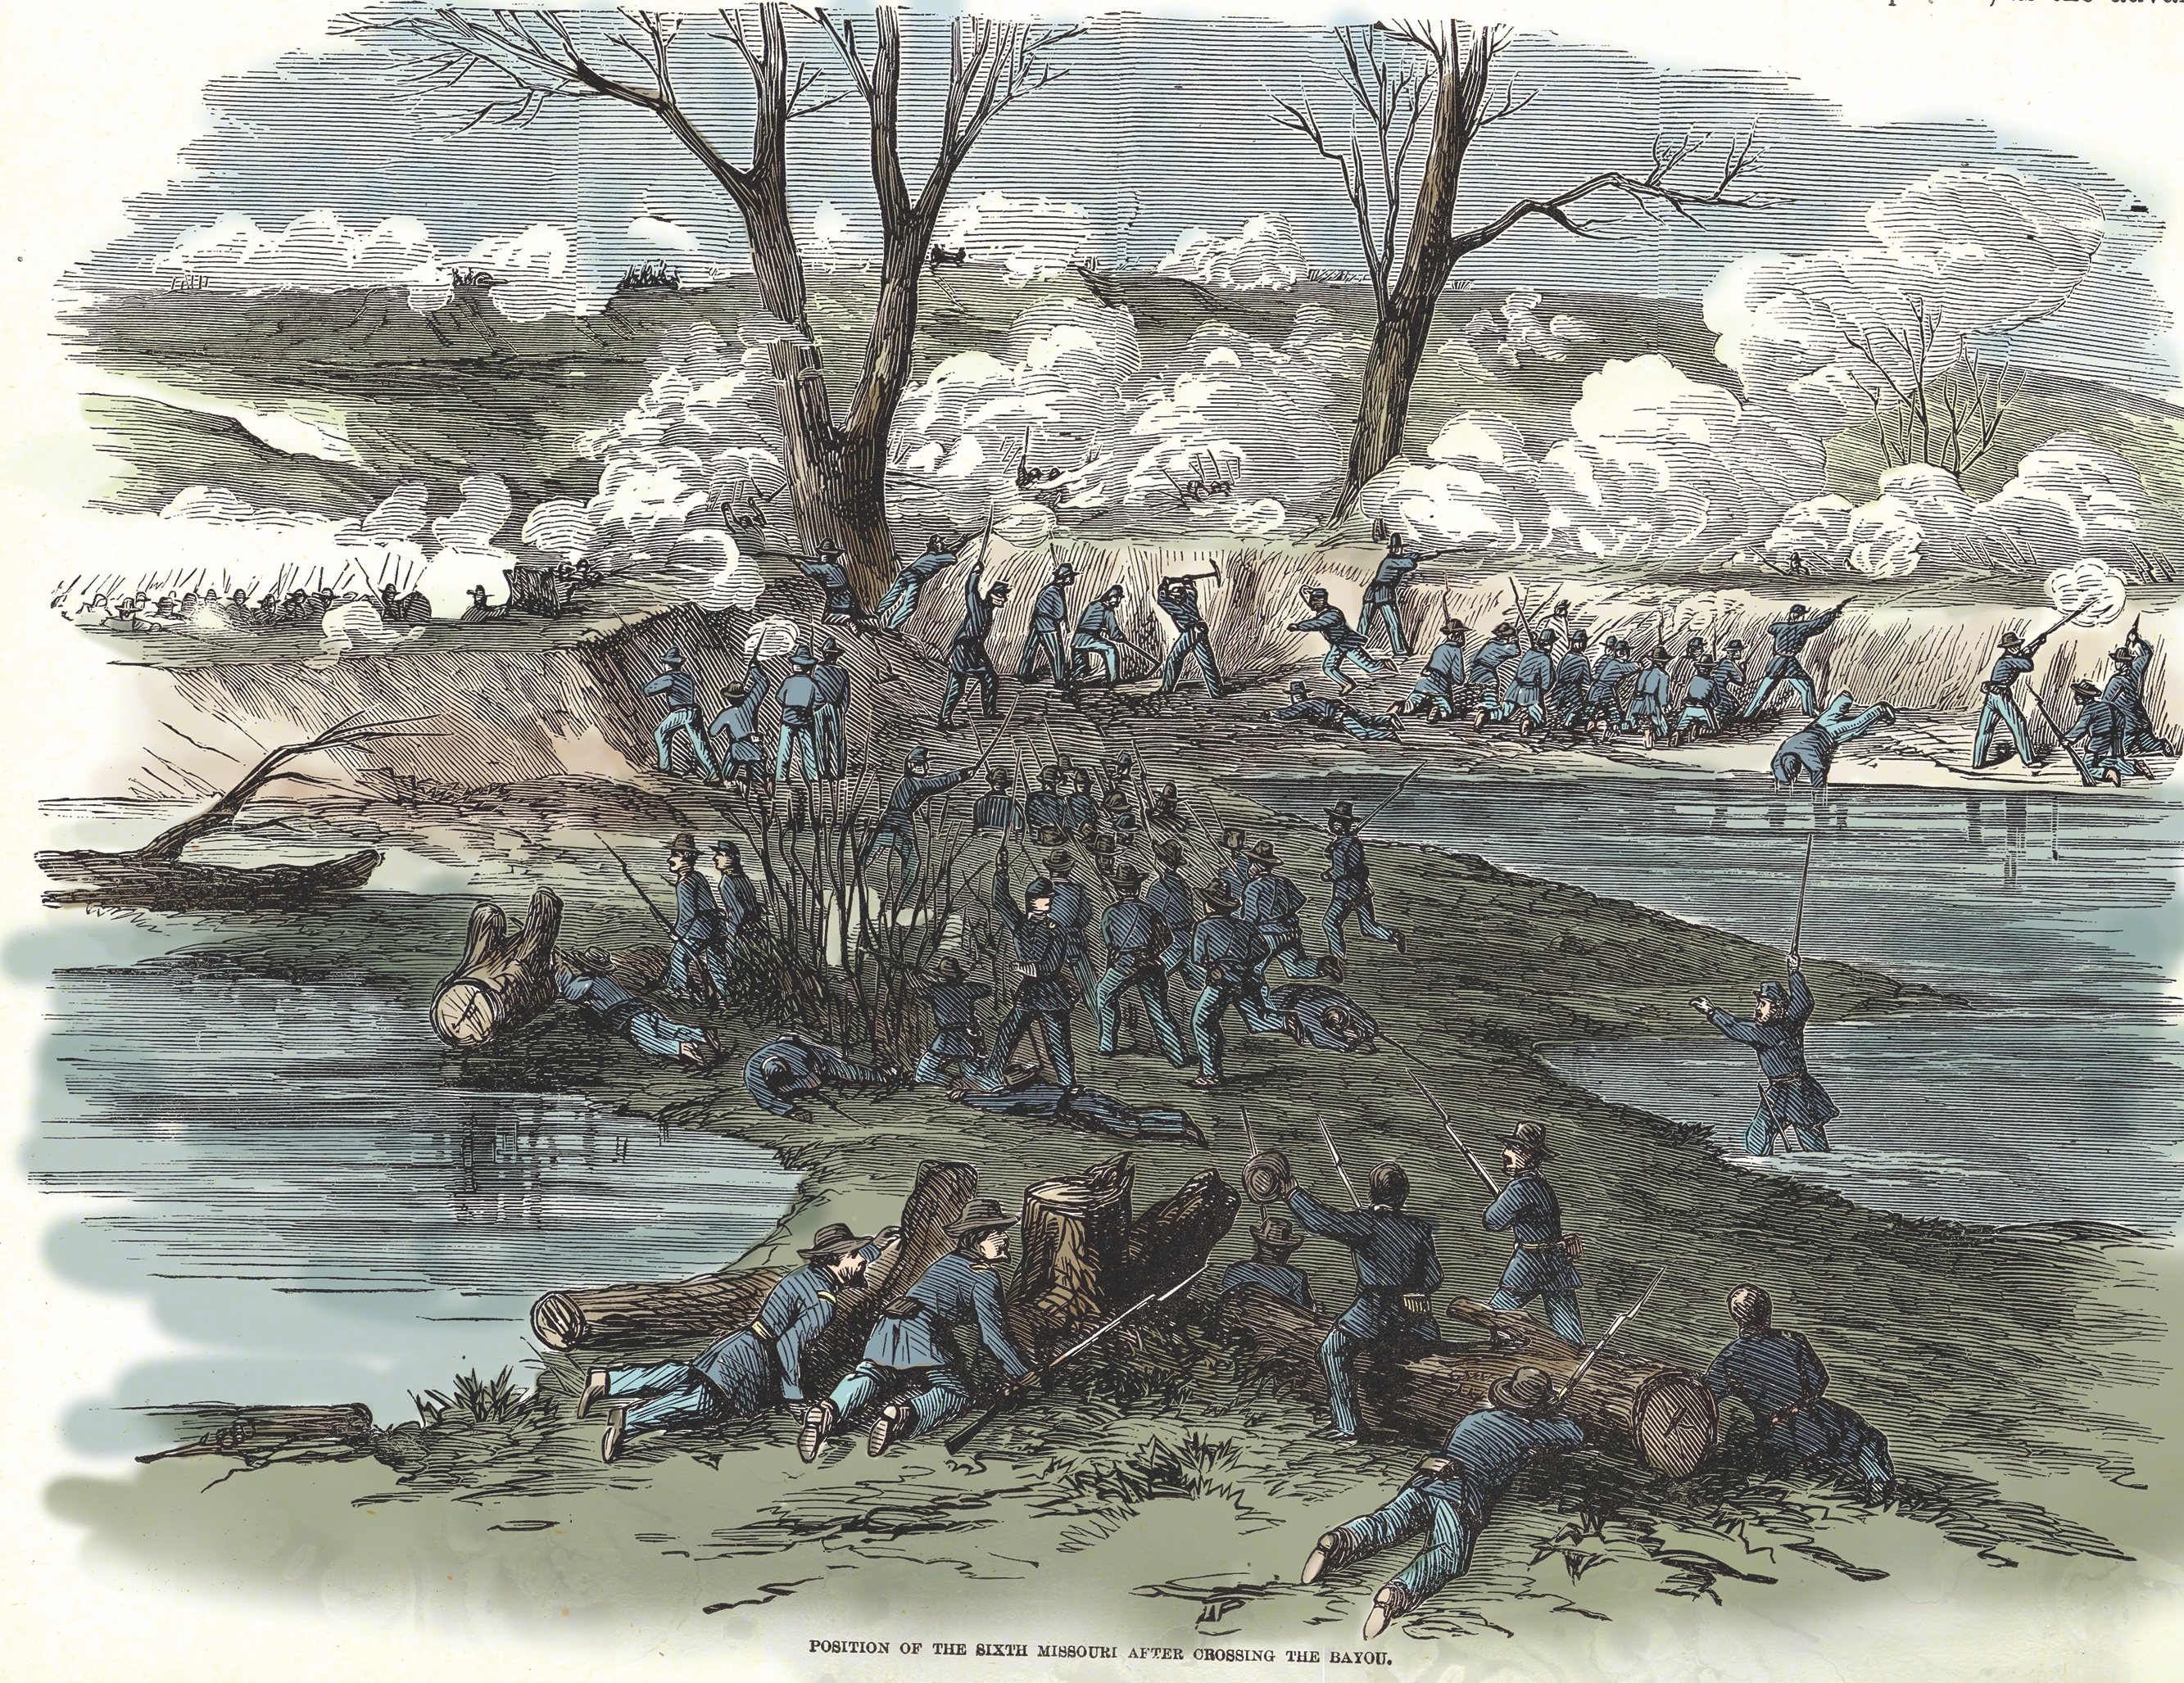 Troops of the 6th Missouri of Colonel Giles Smith’s brigade wade through water and muck as they go up against the 52nd Georgia at the left end of the Confederate line. (©Don Troiani/Bridgeman Images)